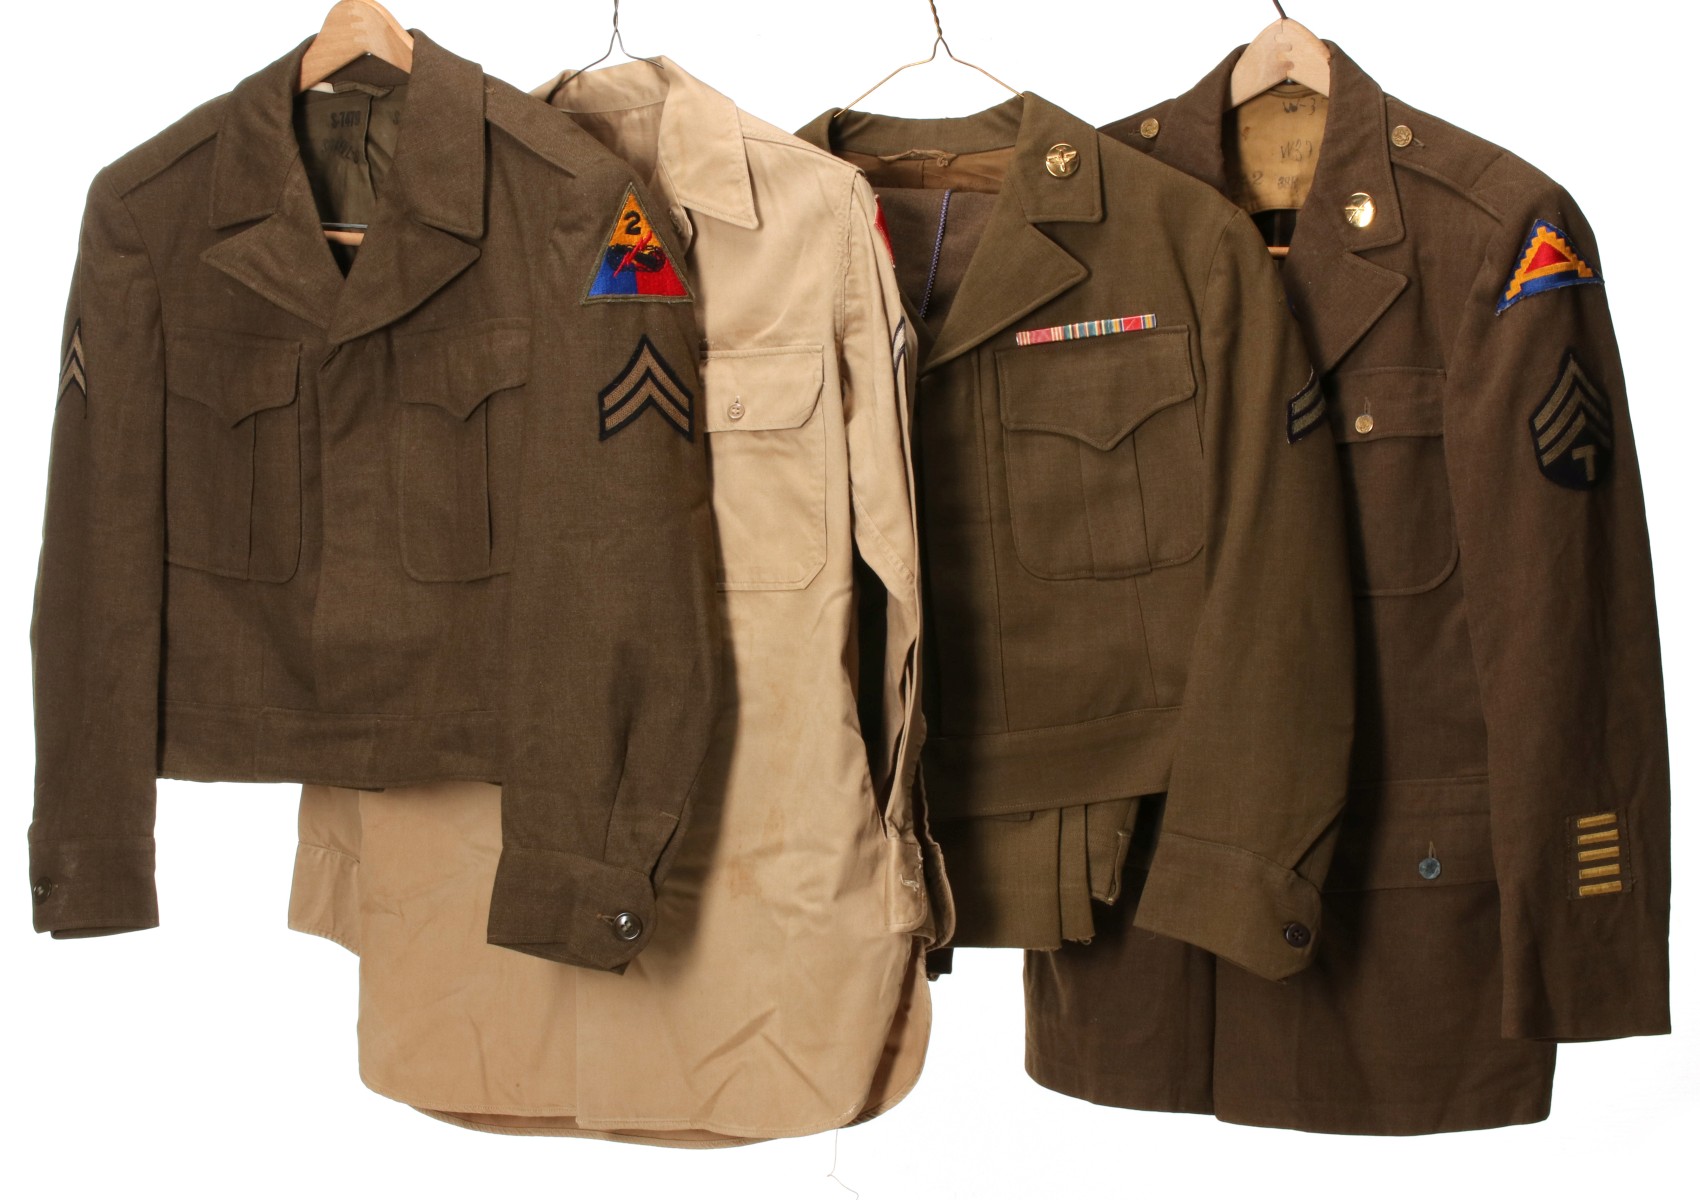 ARMY AND ARMY AIR FORCE IKE JACKETS AND OTHER UNIFORMS